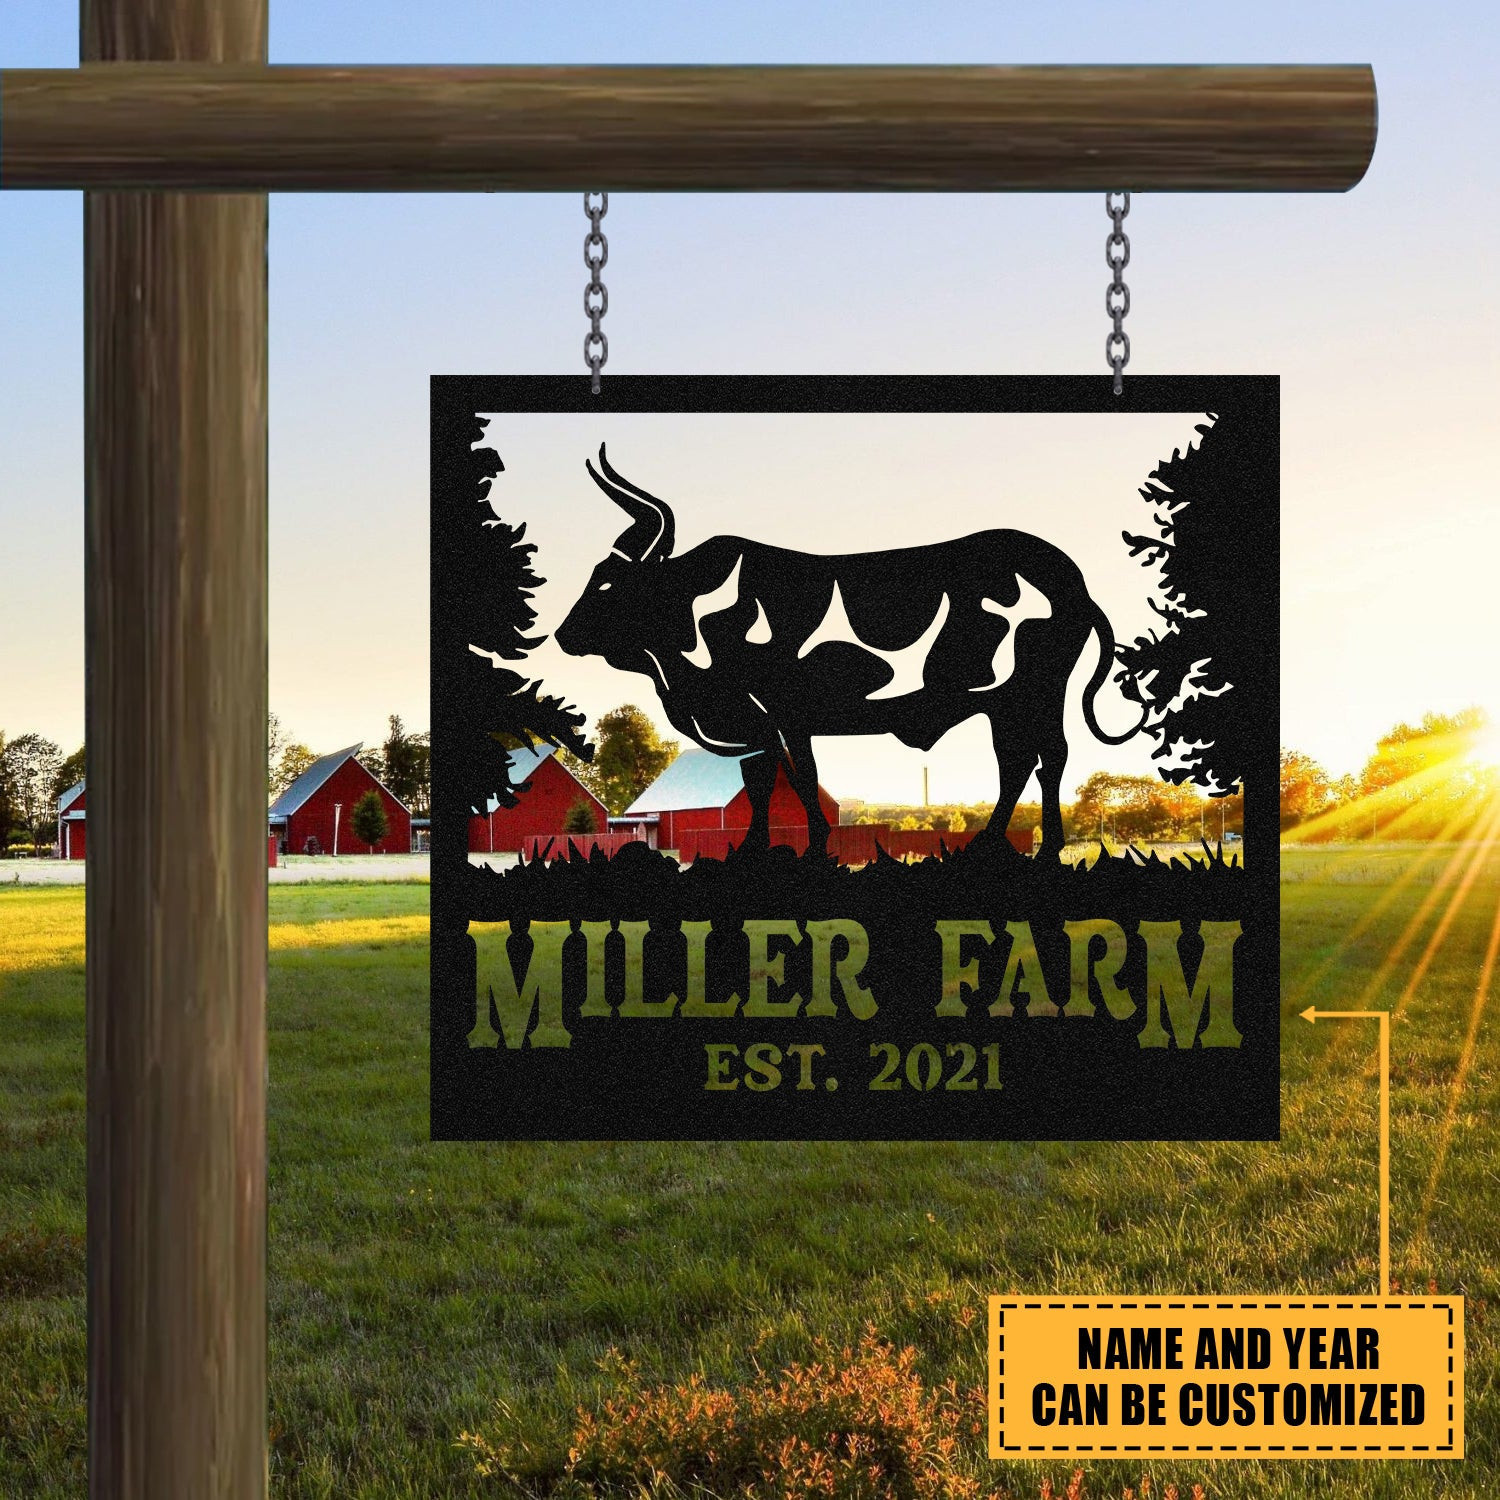 Personalized Metal Farm Sign Bull, Custom Outdoor Farmhouse, Ranch, Stable, Wall Decor Art Gift, Metal Laser Cut Metal Signs Custom Gift Ideas 12x12IN